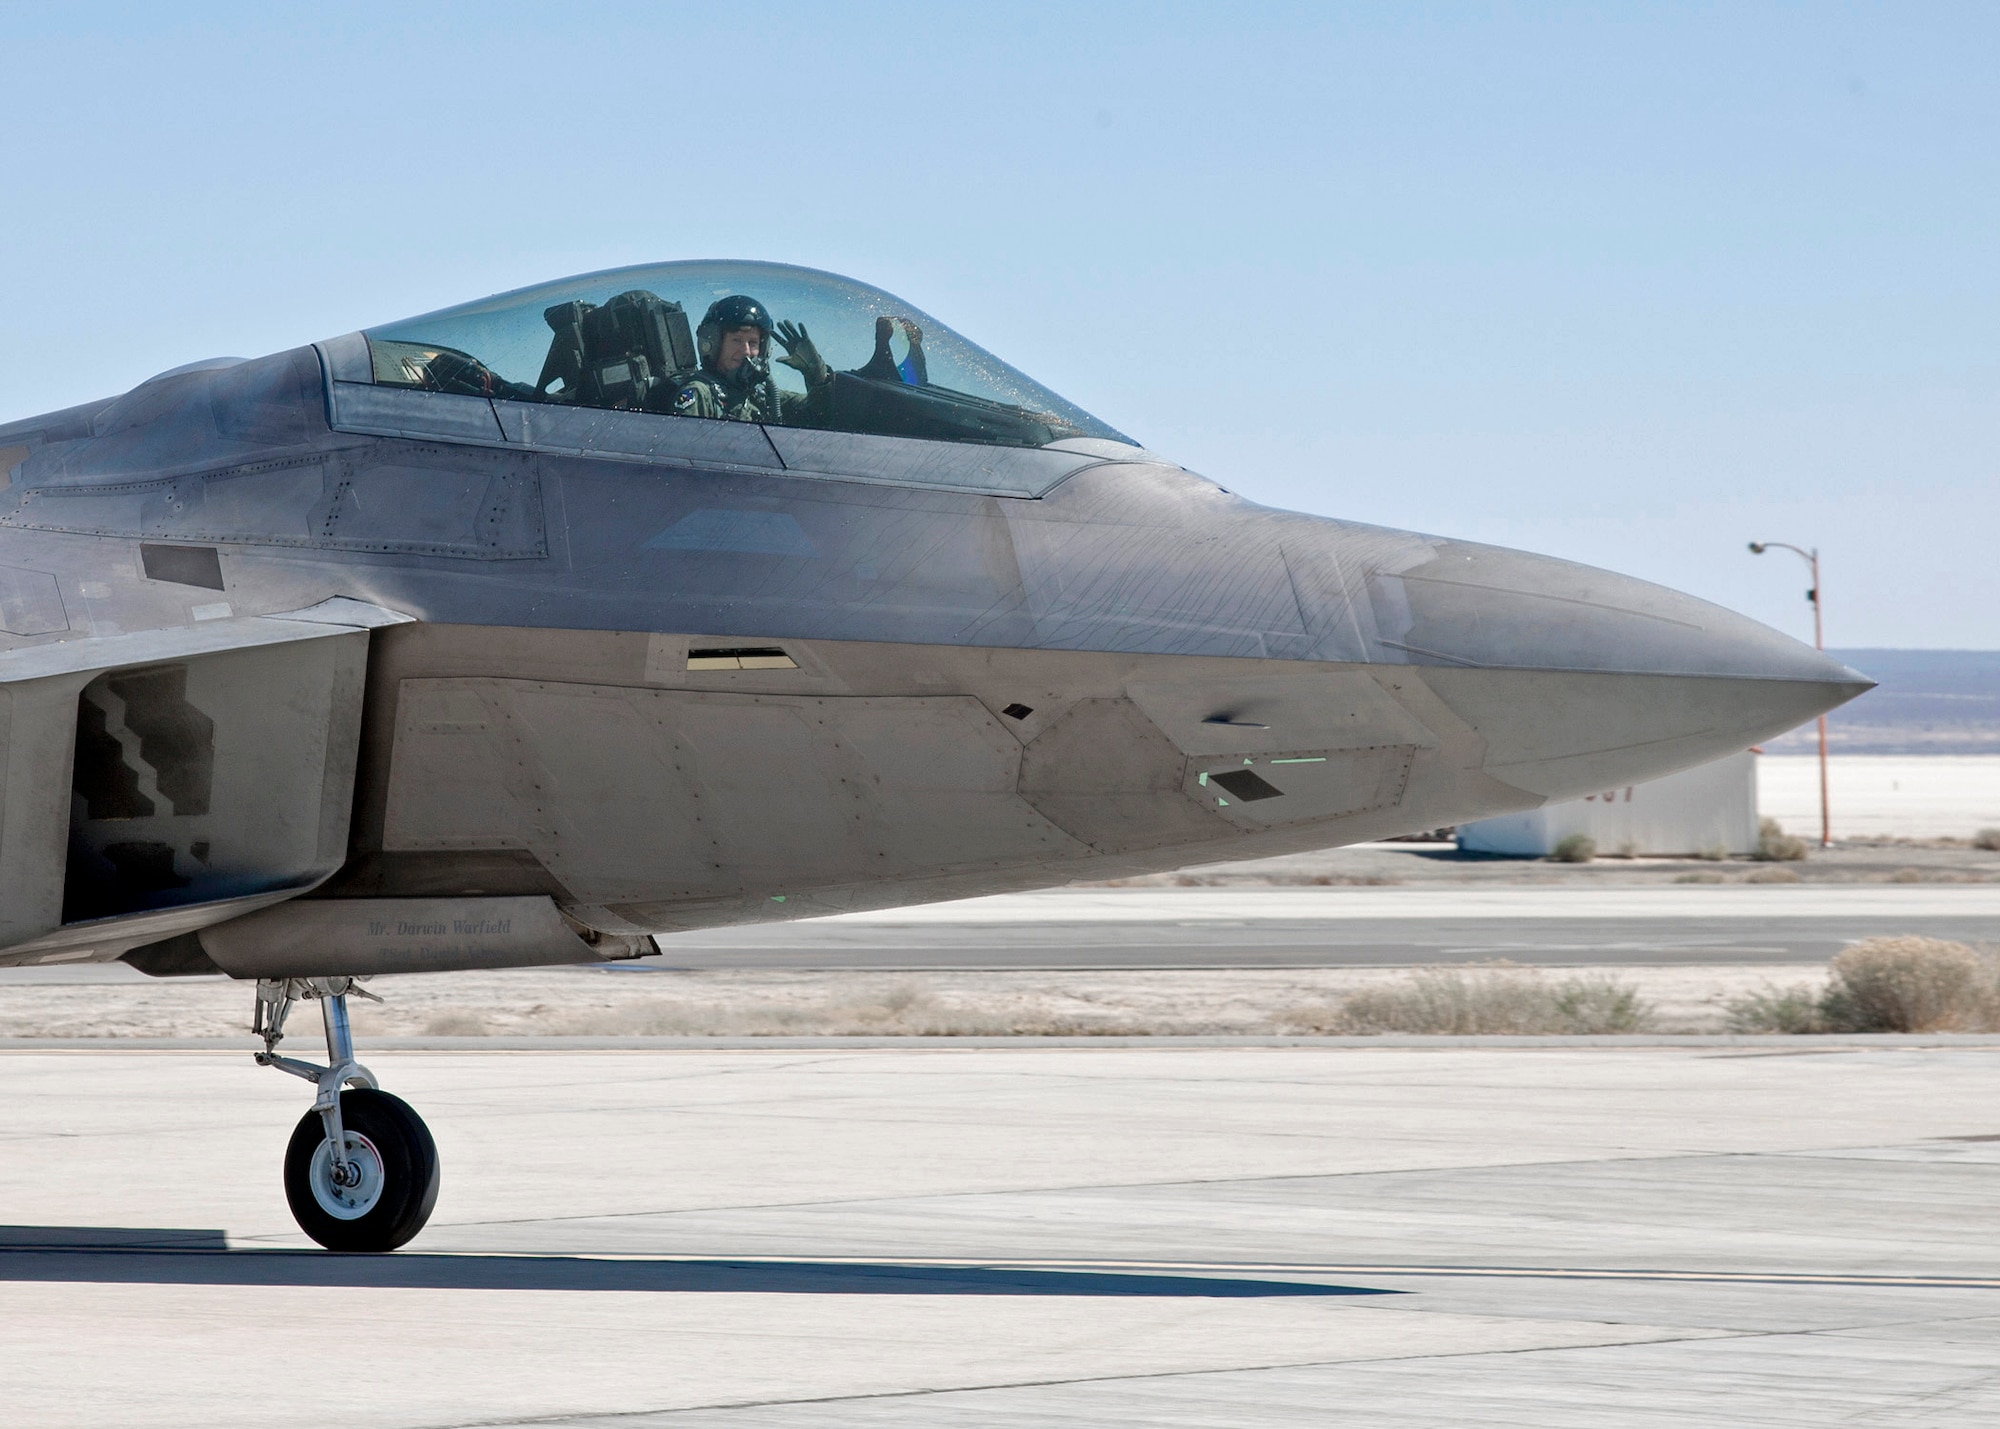 Maj. Gen. Dawn Dunlop, former 412th Test Wing commander, conducted her final flight as wing commander onboard an F-22 Raptor at Edwards Air Force Base, California, March 12, 2012. Dunlop served as the vice commander and then eventually commander from August 2009, to March 2012. (U.S. Air Force photo by David Henry)